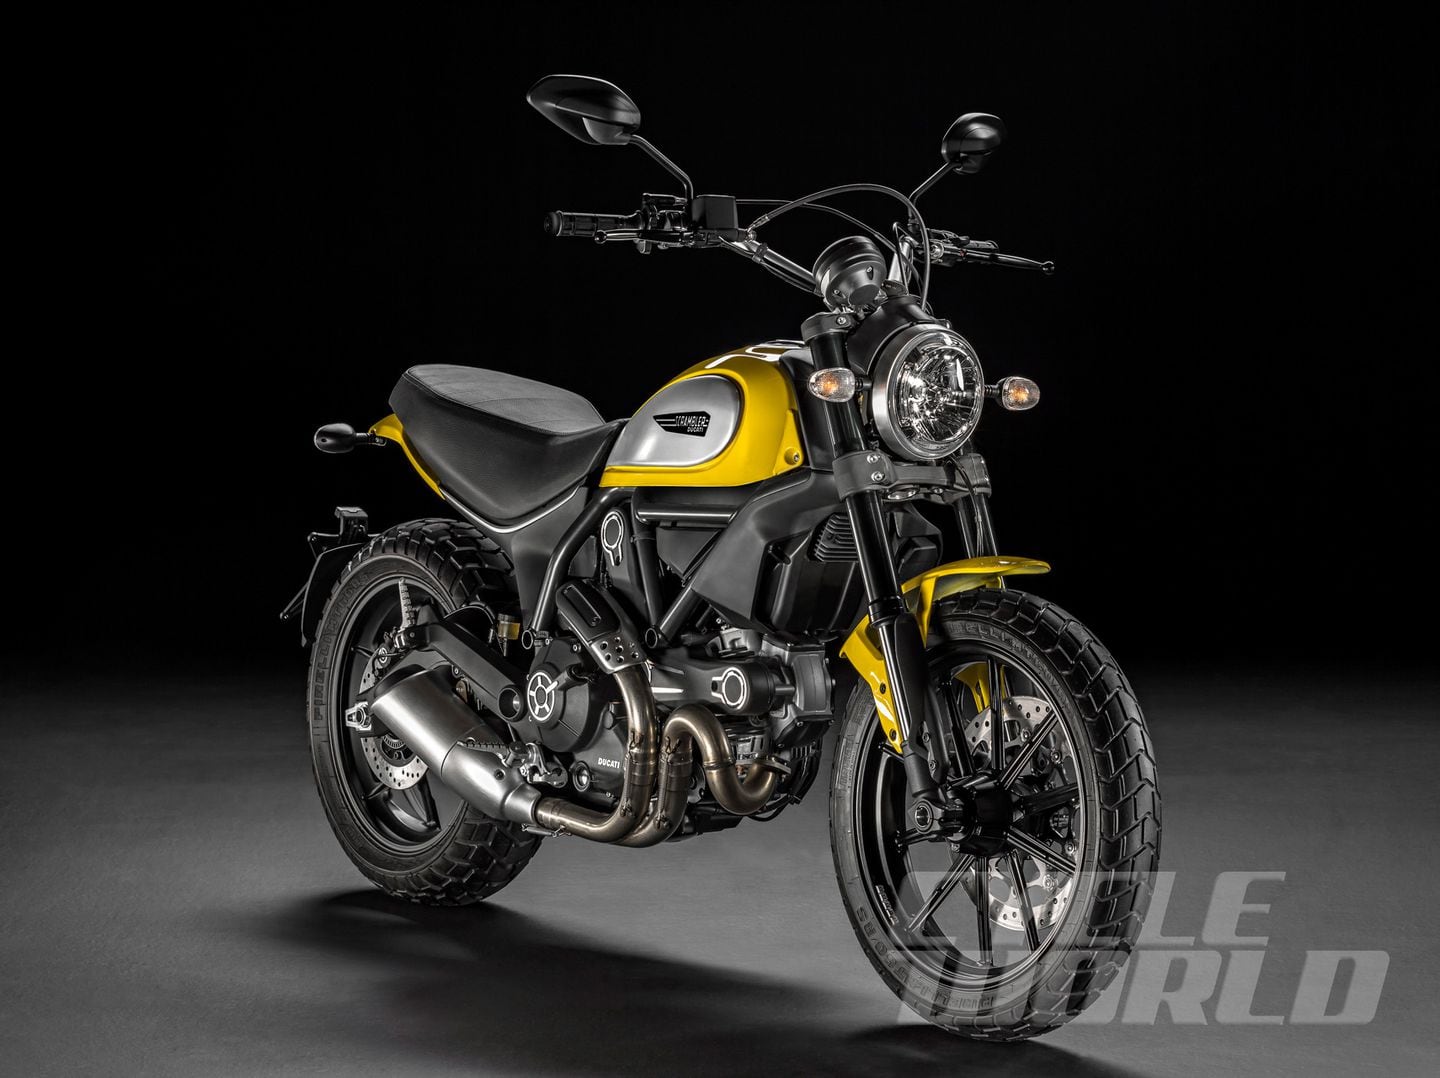 2015 Ducati Scrambler First Look Motorcycle Review- Photos- Specs- Pricing